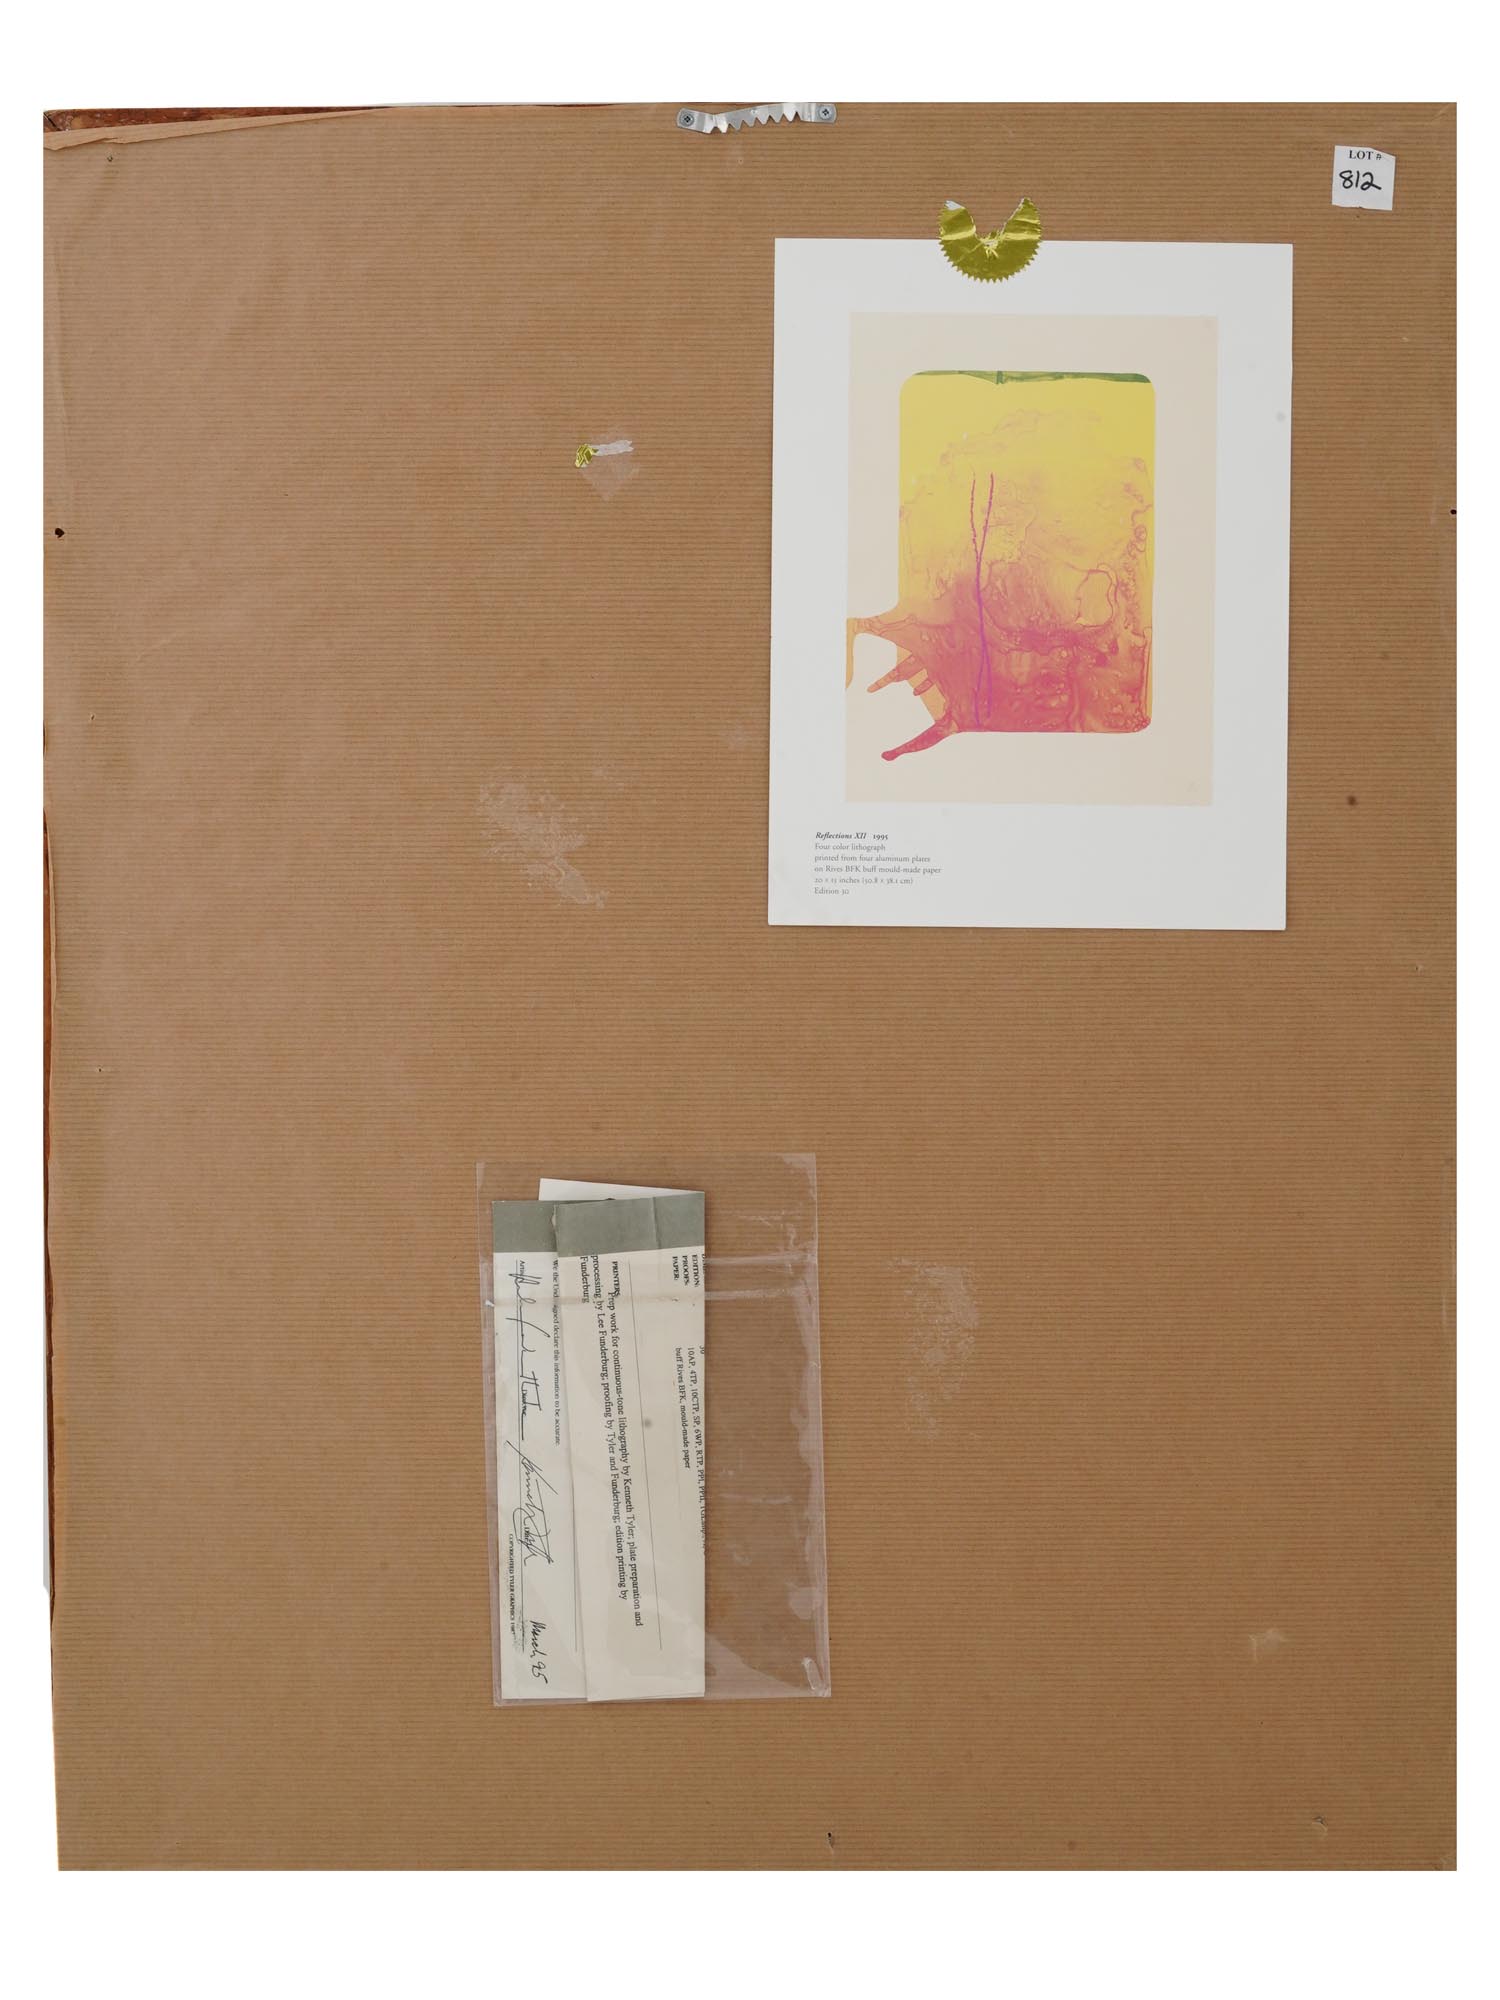 ABSTRACT AMERICAN LITHOGRAPH BY HELEN FRANKENTHALER PIC-6